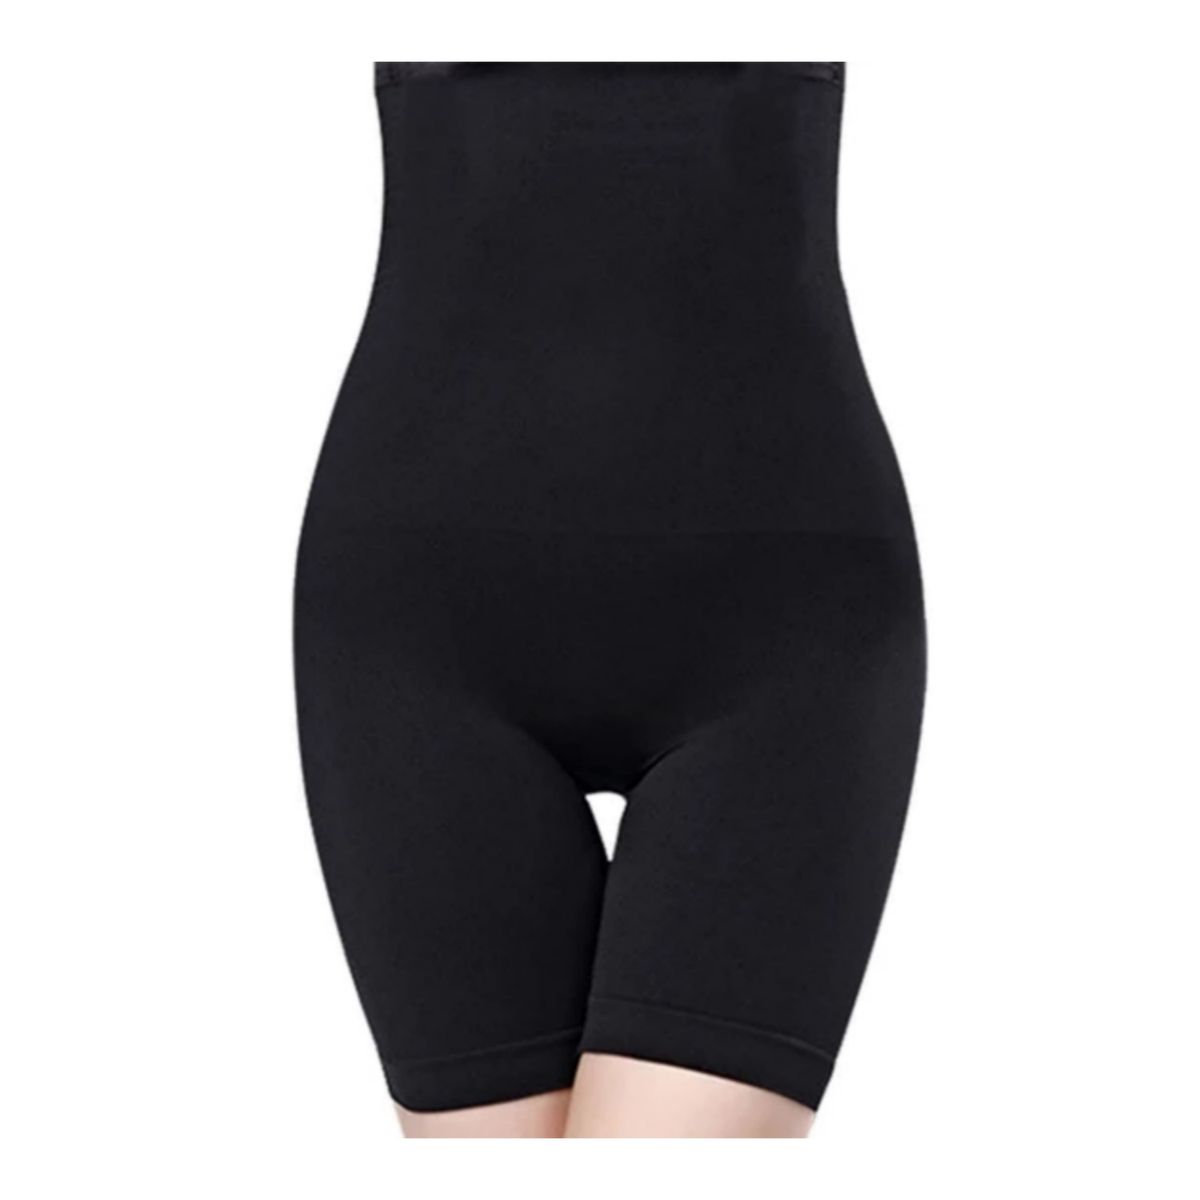 Women High Waist Slimming Tummy Control Knickers Pant Briefs | Shop Today. Get it Tomorrow